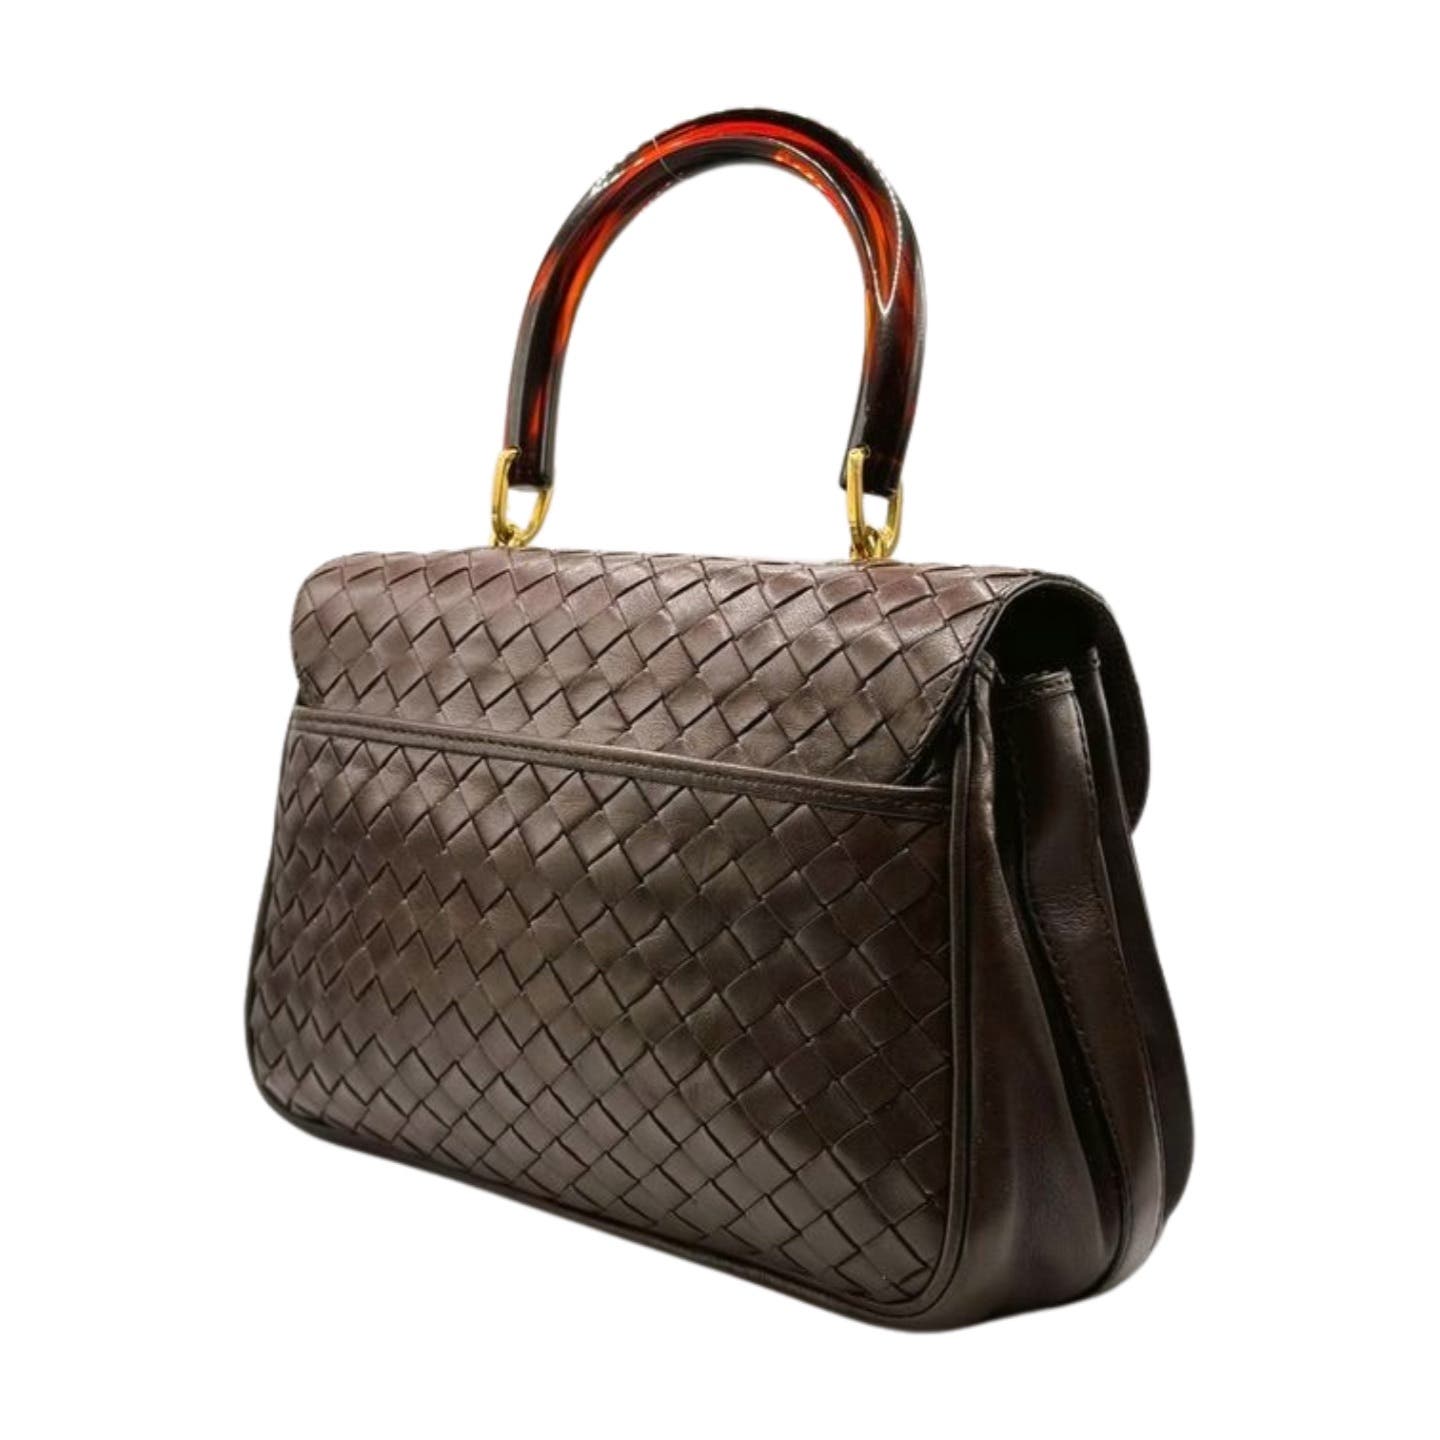 A stylish Bottega Veneta Intrecciato Top Handle Bag featuring an intrecciato woven pattern on its main body. It is complemented by sturdy handles made of a semi-transparent, dark amber material with gold-tone hardware. The handbag has a structured shape with a slightly curved top edge.